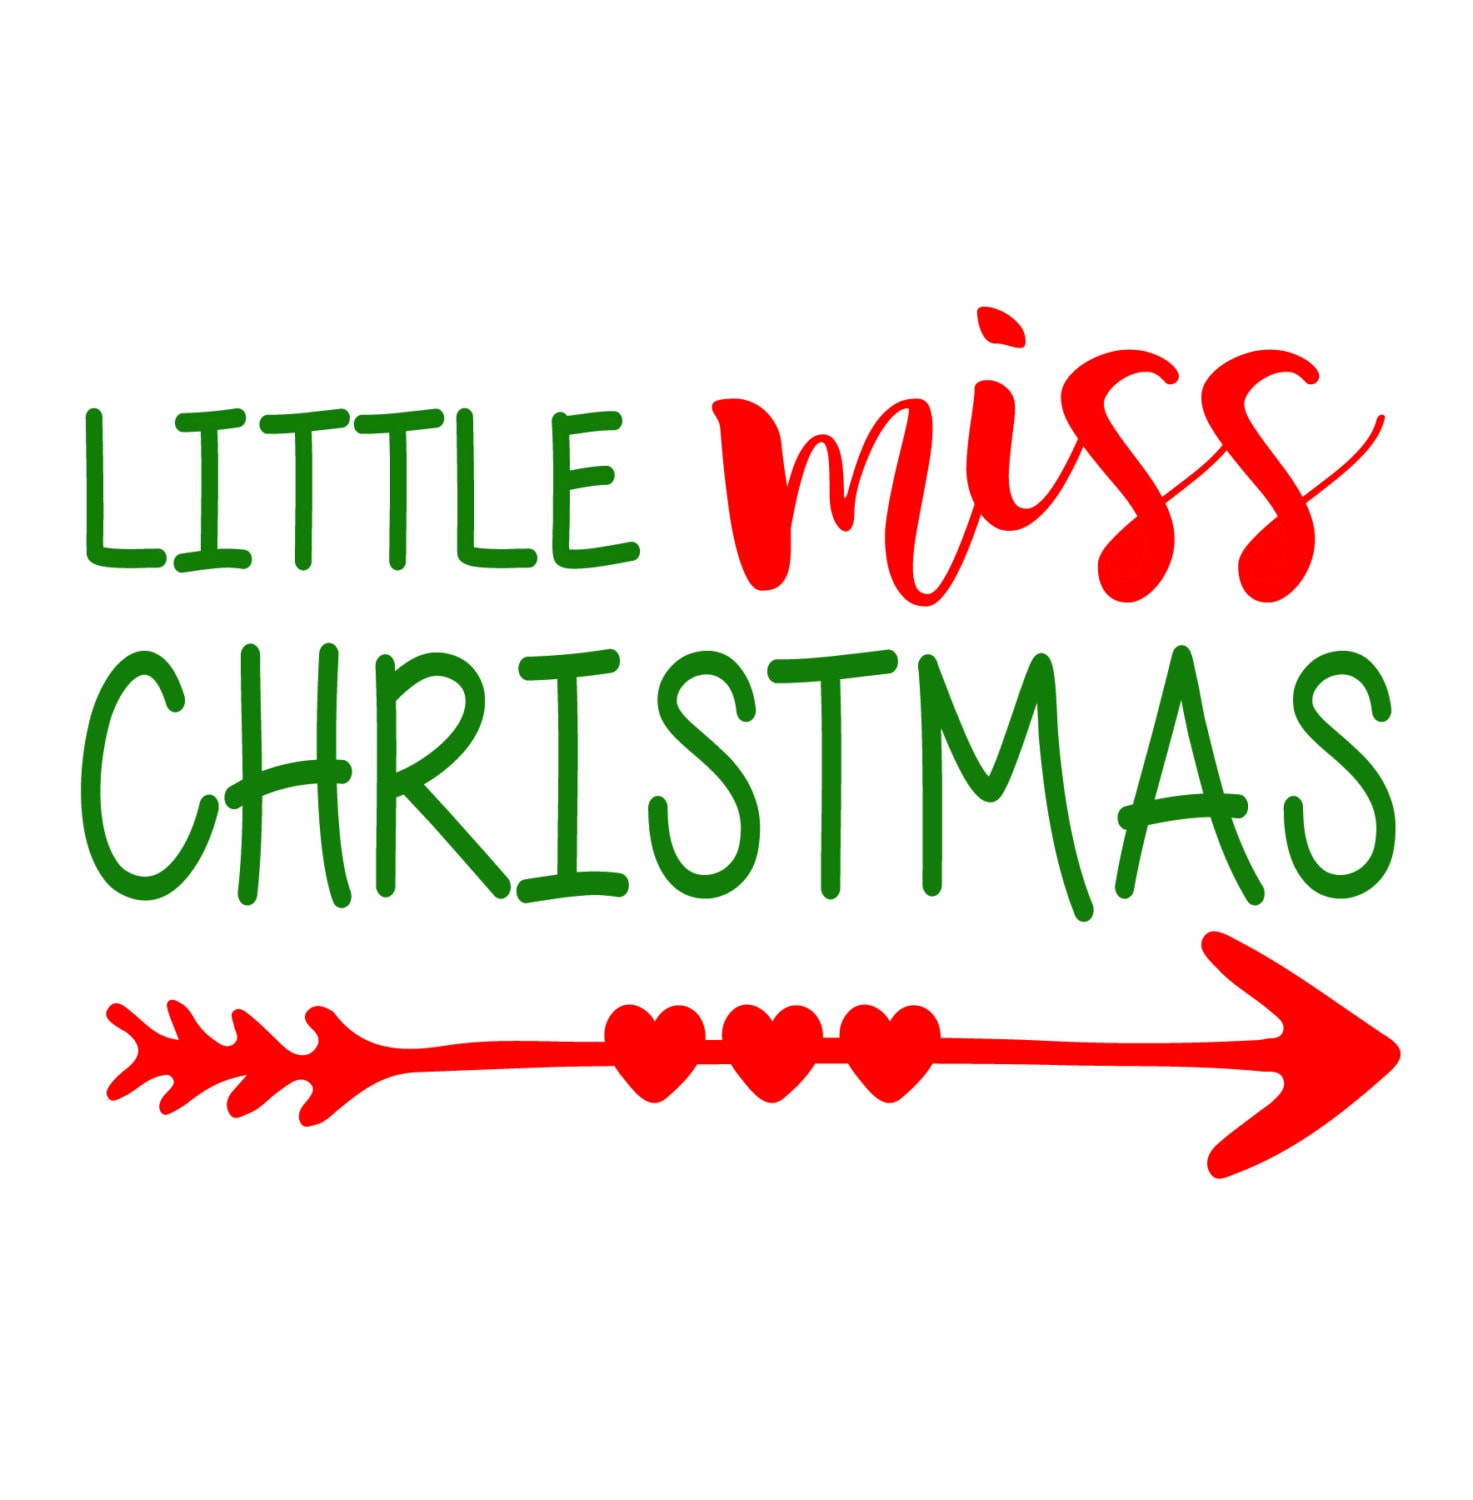 Little Miss Christmas SVG File by CaseCustomCreations on Etsy